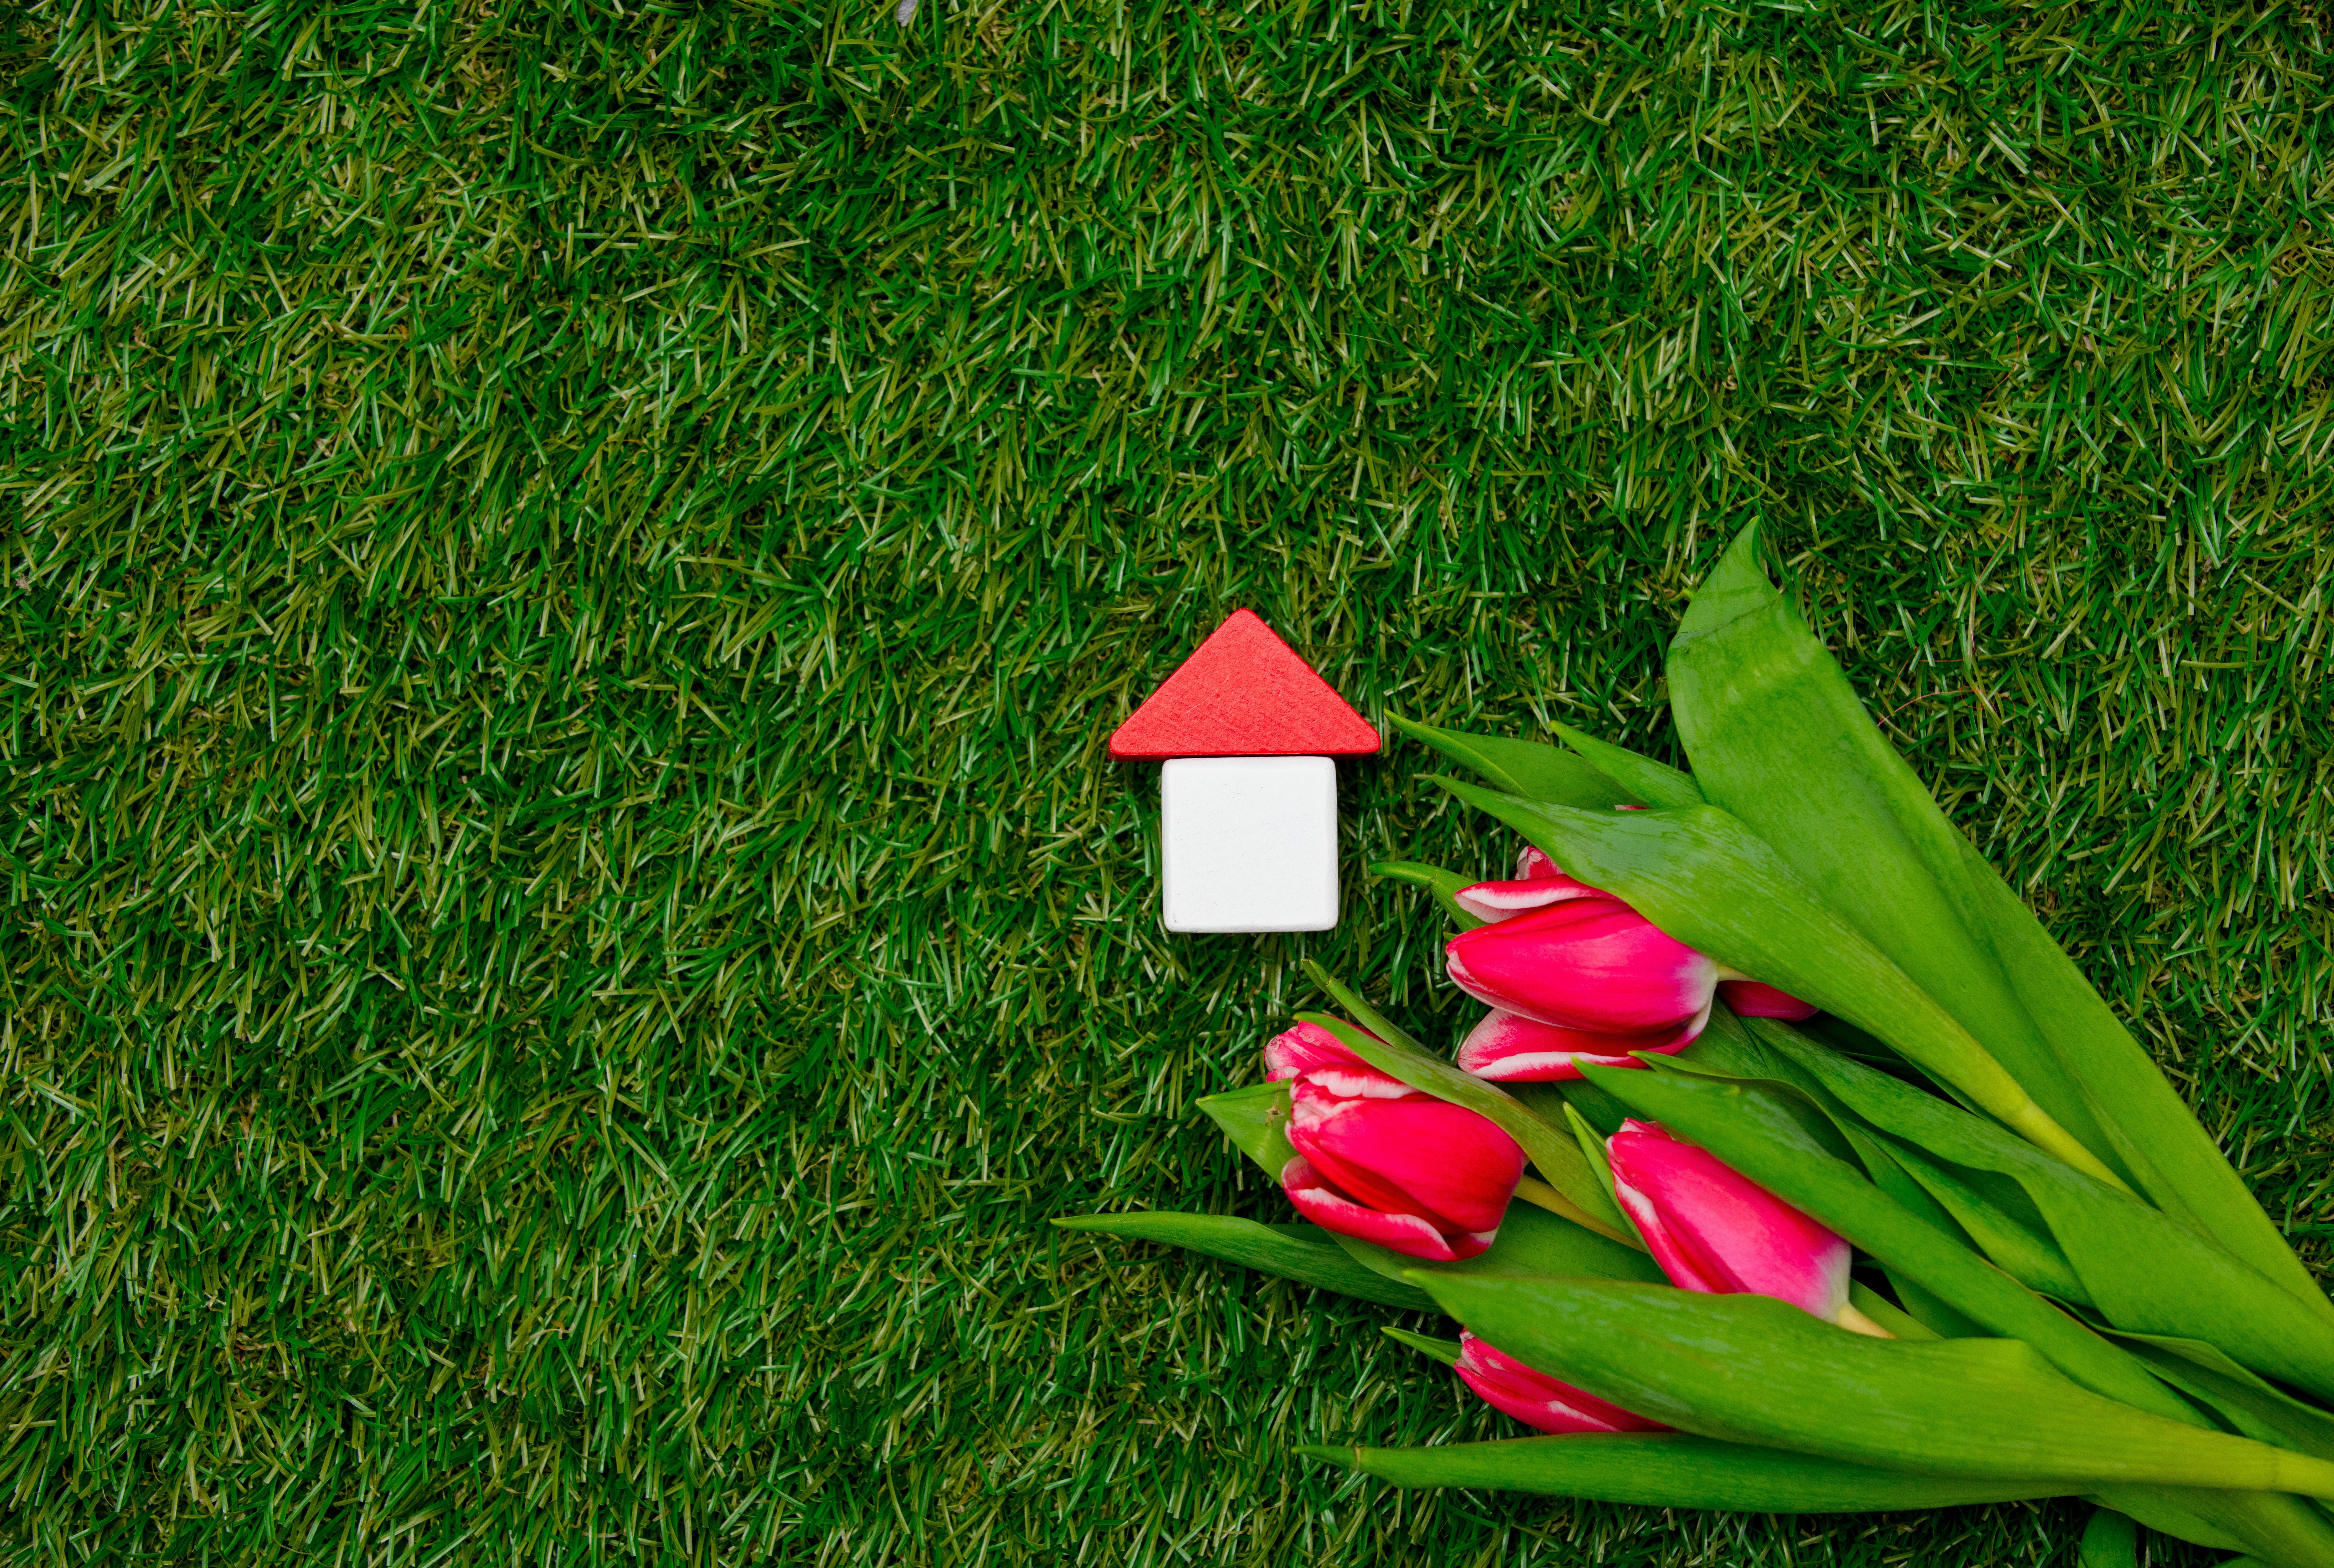 Miniature red-roofed house on lush green grass with vibrant pink tulips, symbolizing a fresh start or new ownership in spring.